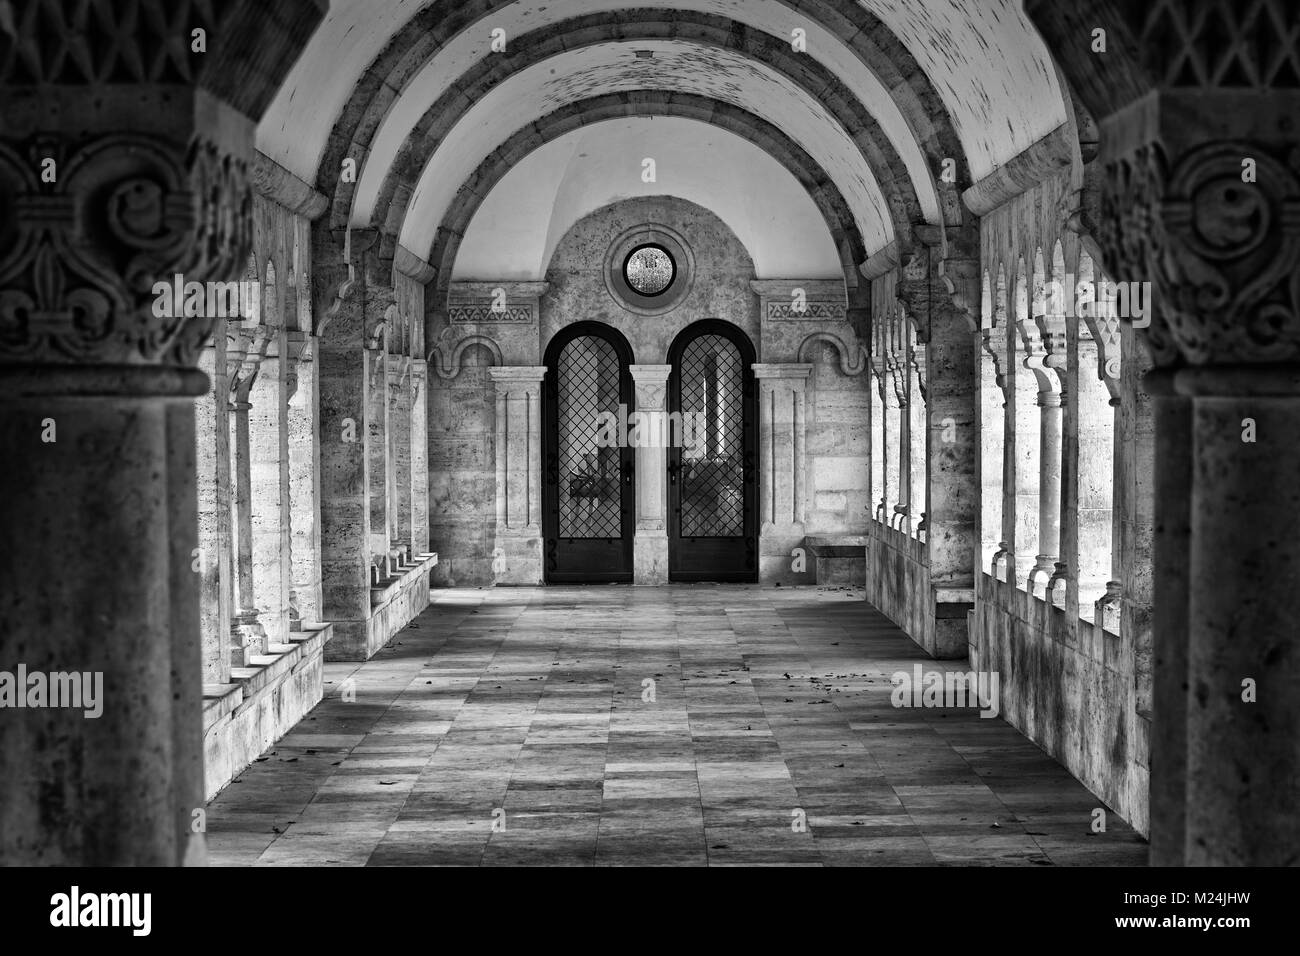 A grand and long corridor in Budavári Palota (Buda Castle), Budapest, Hungary photographed in black and white. Stock Photo